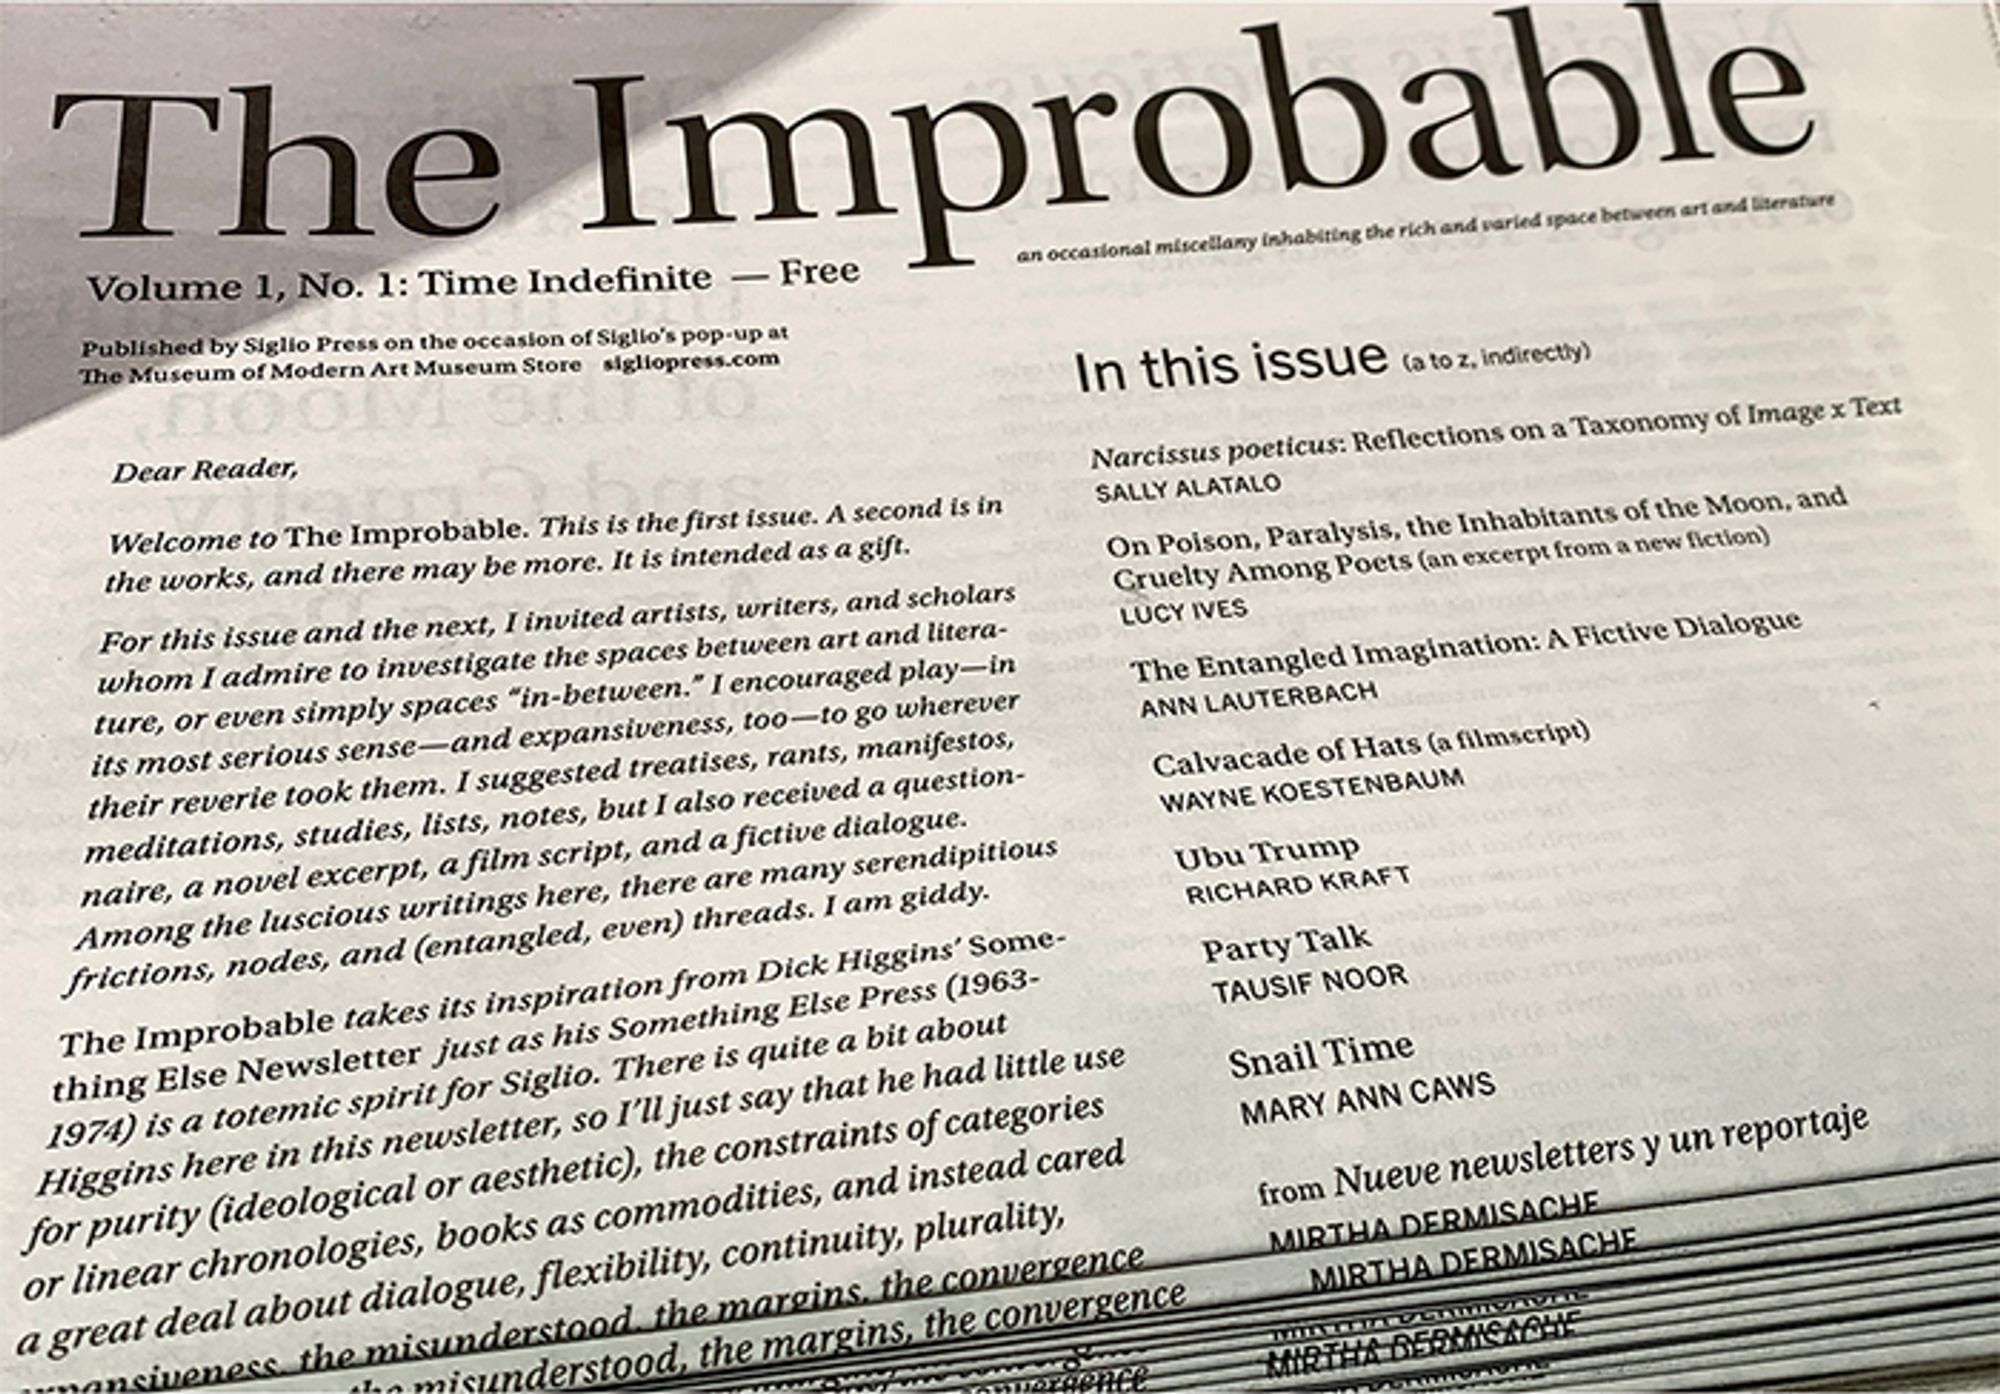 The Improbable, Issue No. 1 (Time Indefinite)